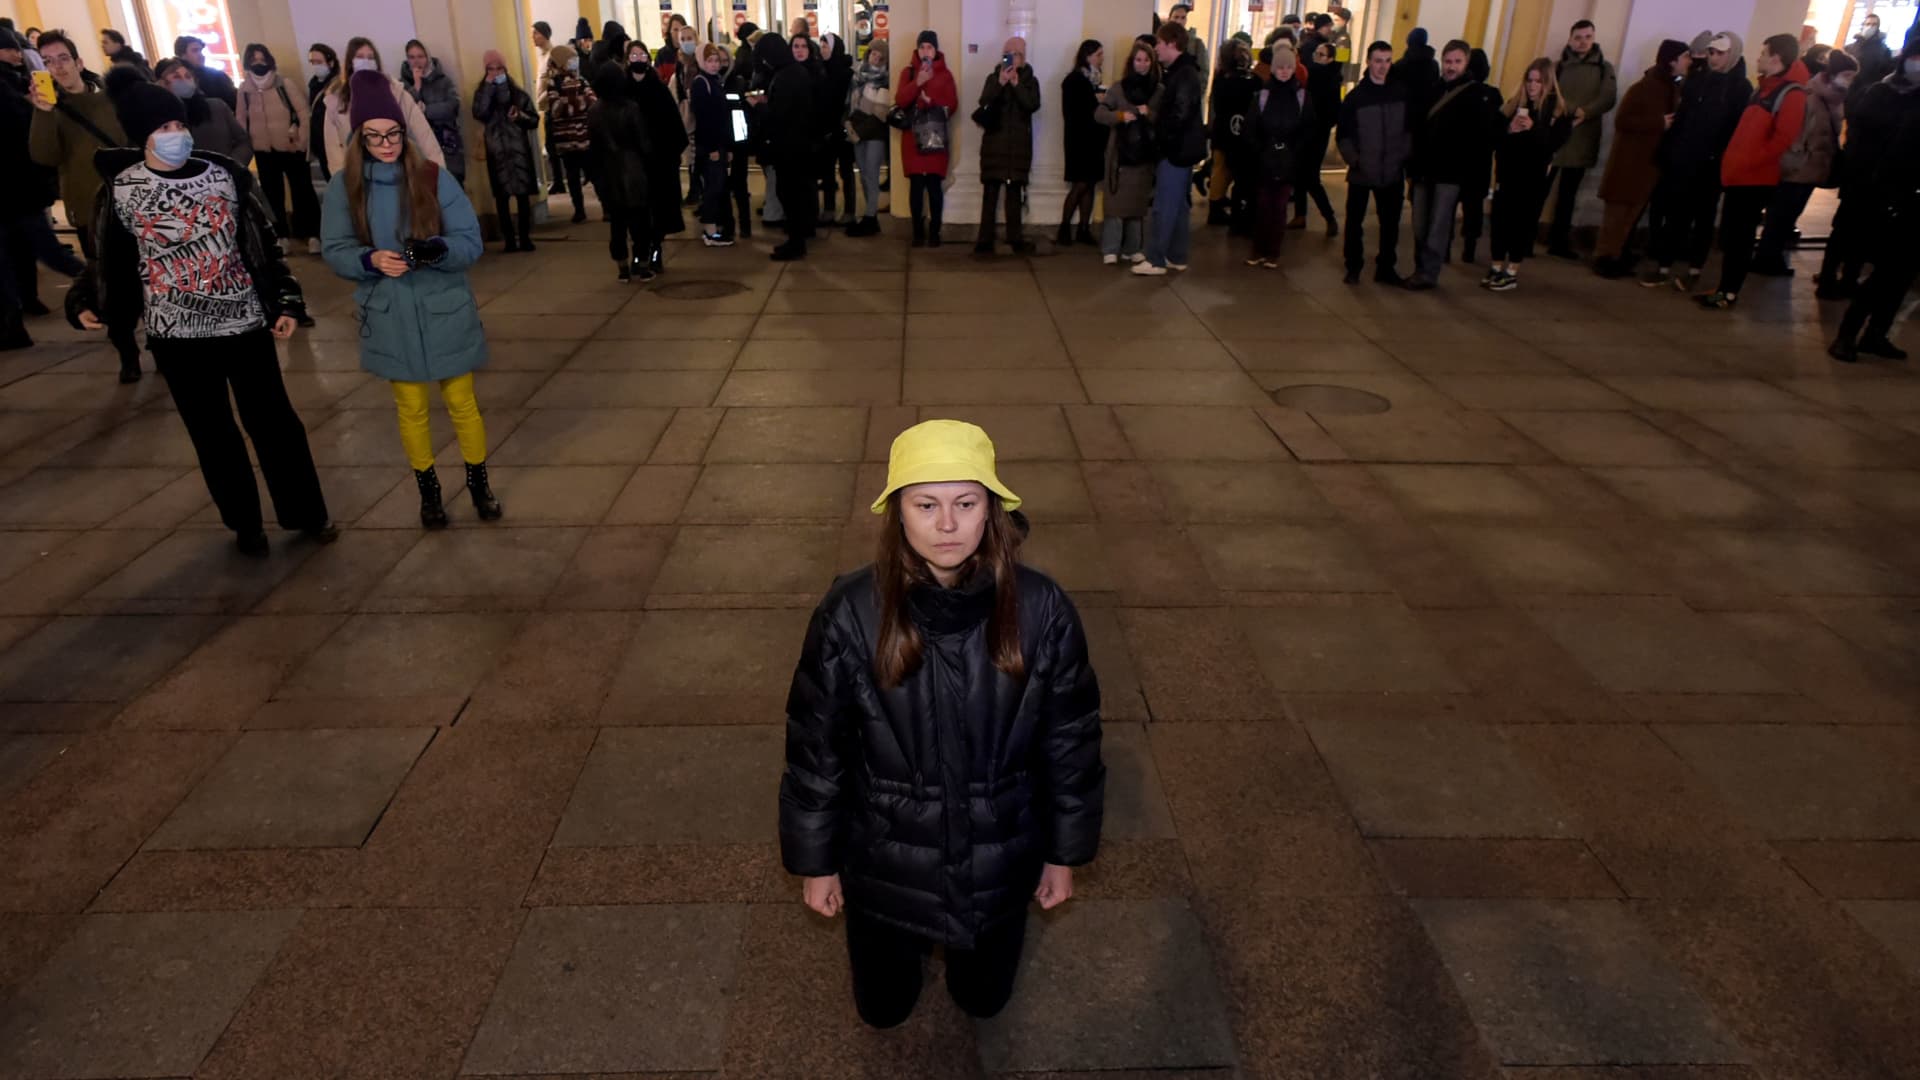 Demonstrator stands on her knees during a protest against Russia's invasion of Ukraine in central Saint Petersburg on March 1, 2022.